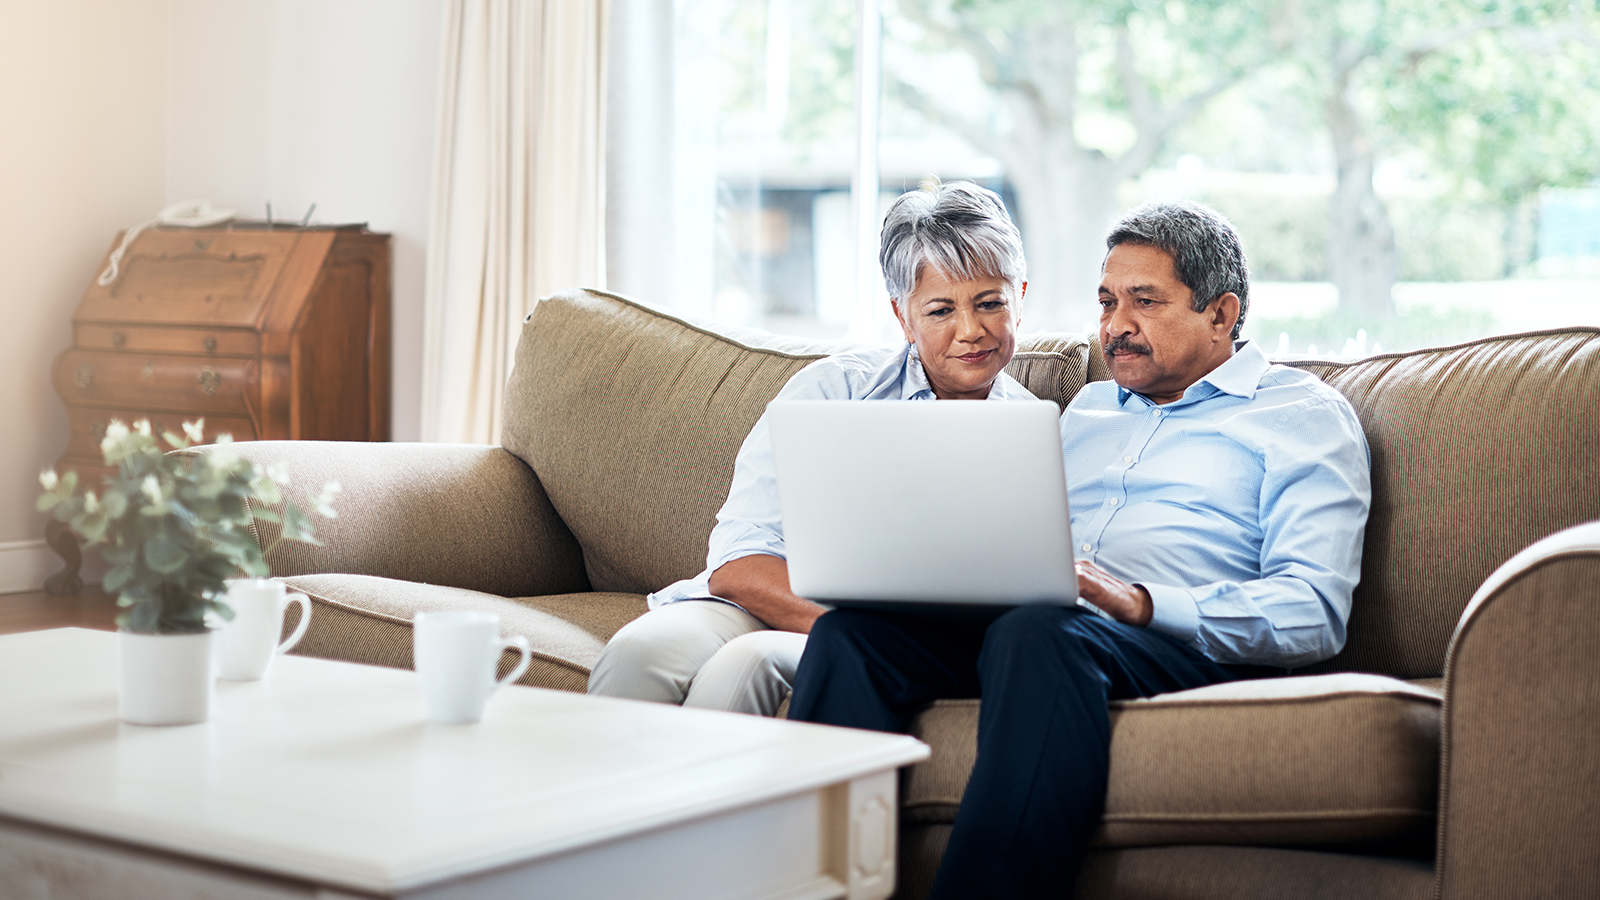 Elderly couple using a computer while sitting on a sofa